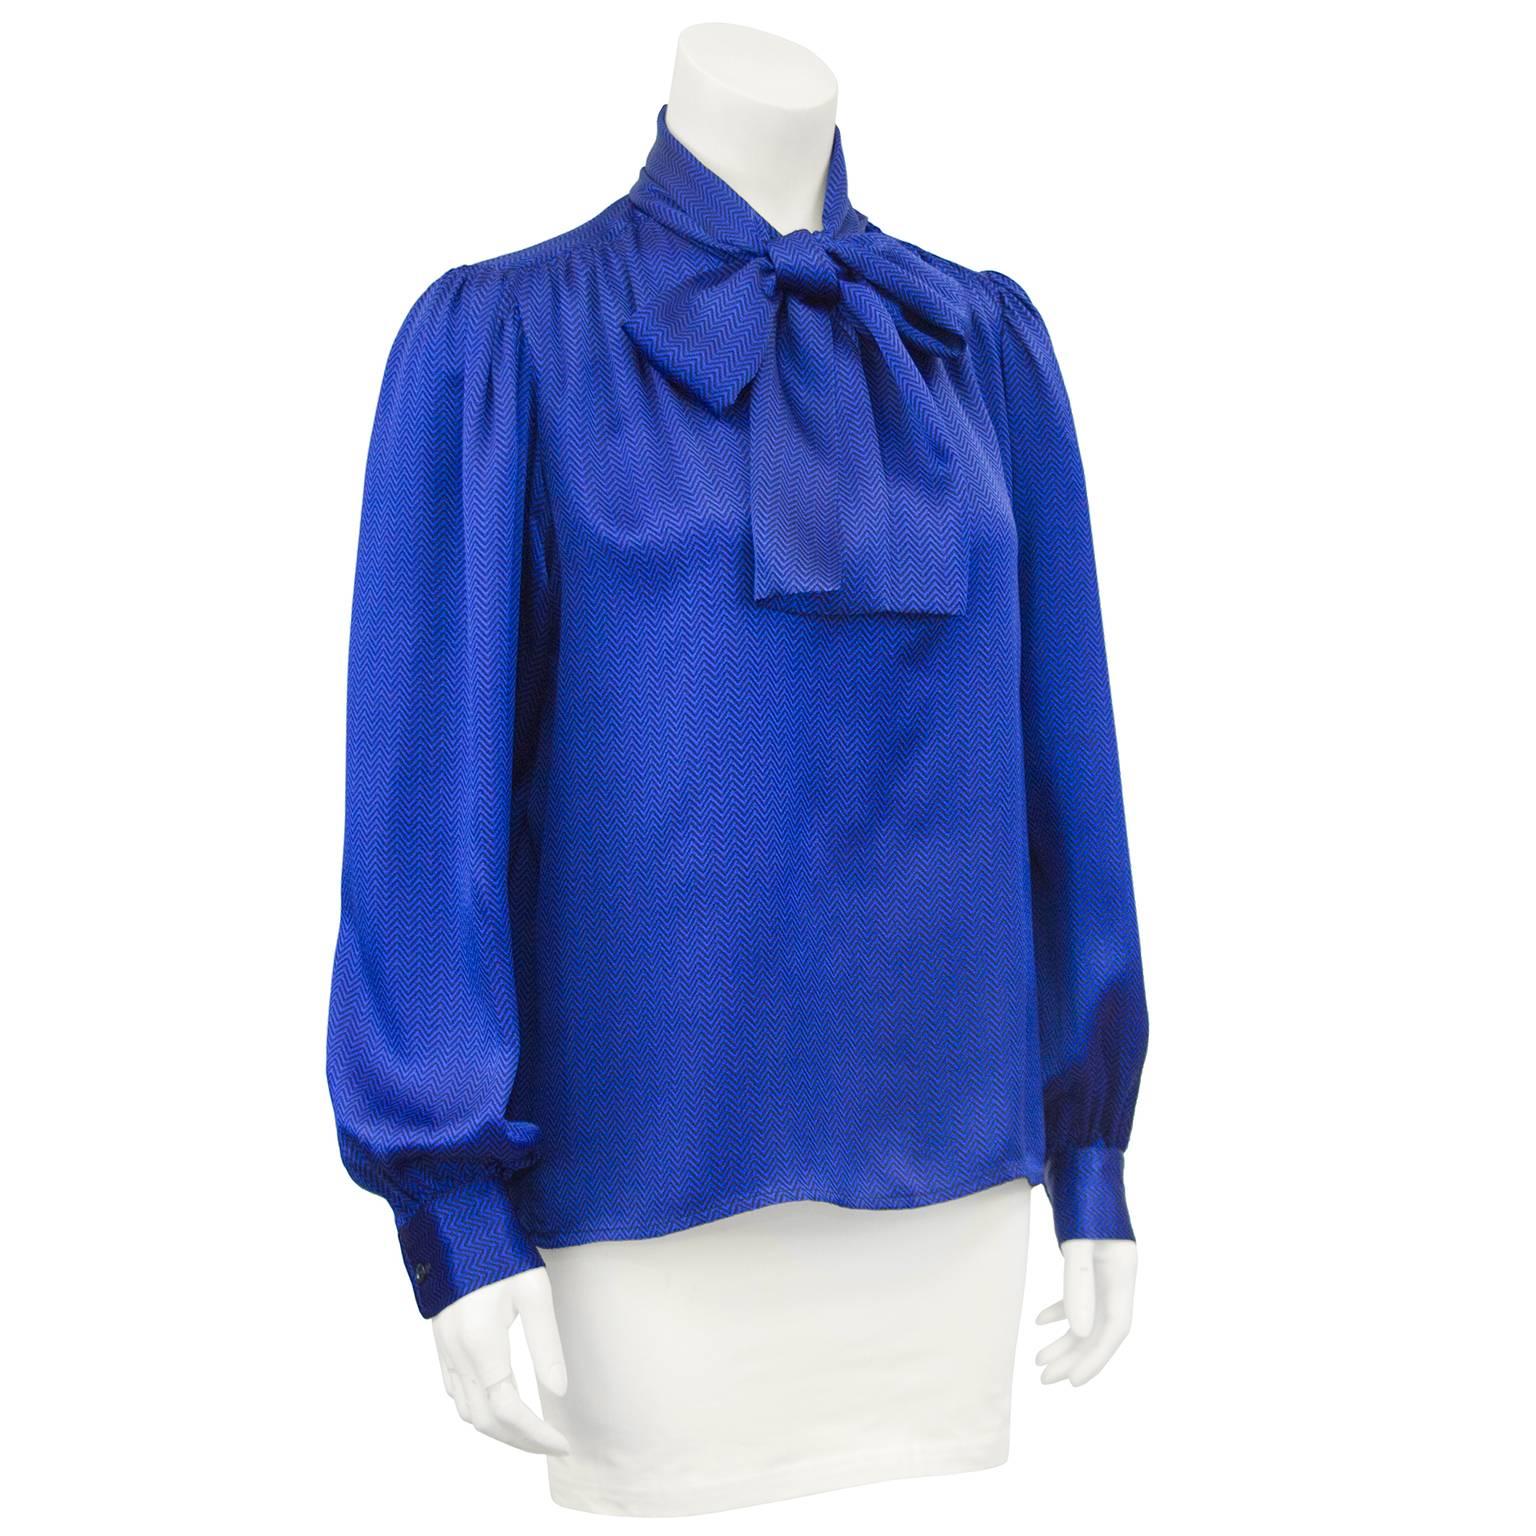 1980s Yves Saint Laurent cobalt blue silk blouse. Small black chevron print throughout. Large pussy bow tie at neck and bishop sleeves. Excellent vintage condition. Marked size FR 40 - fits like a US 6. 

sleeve 24.5 , shoulder 16 , bust 44 , waist